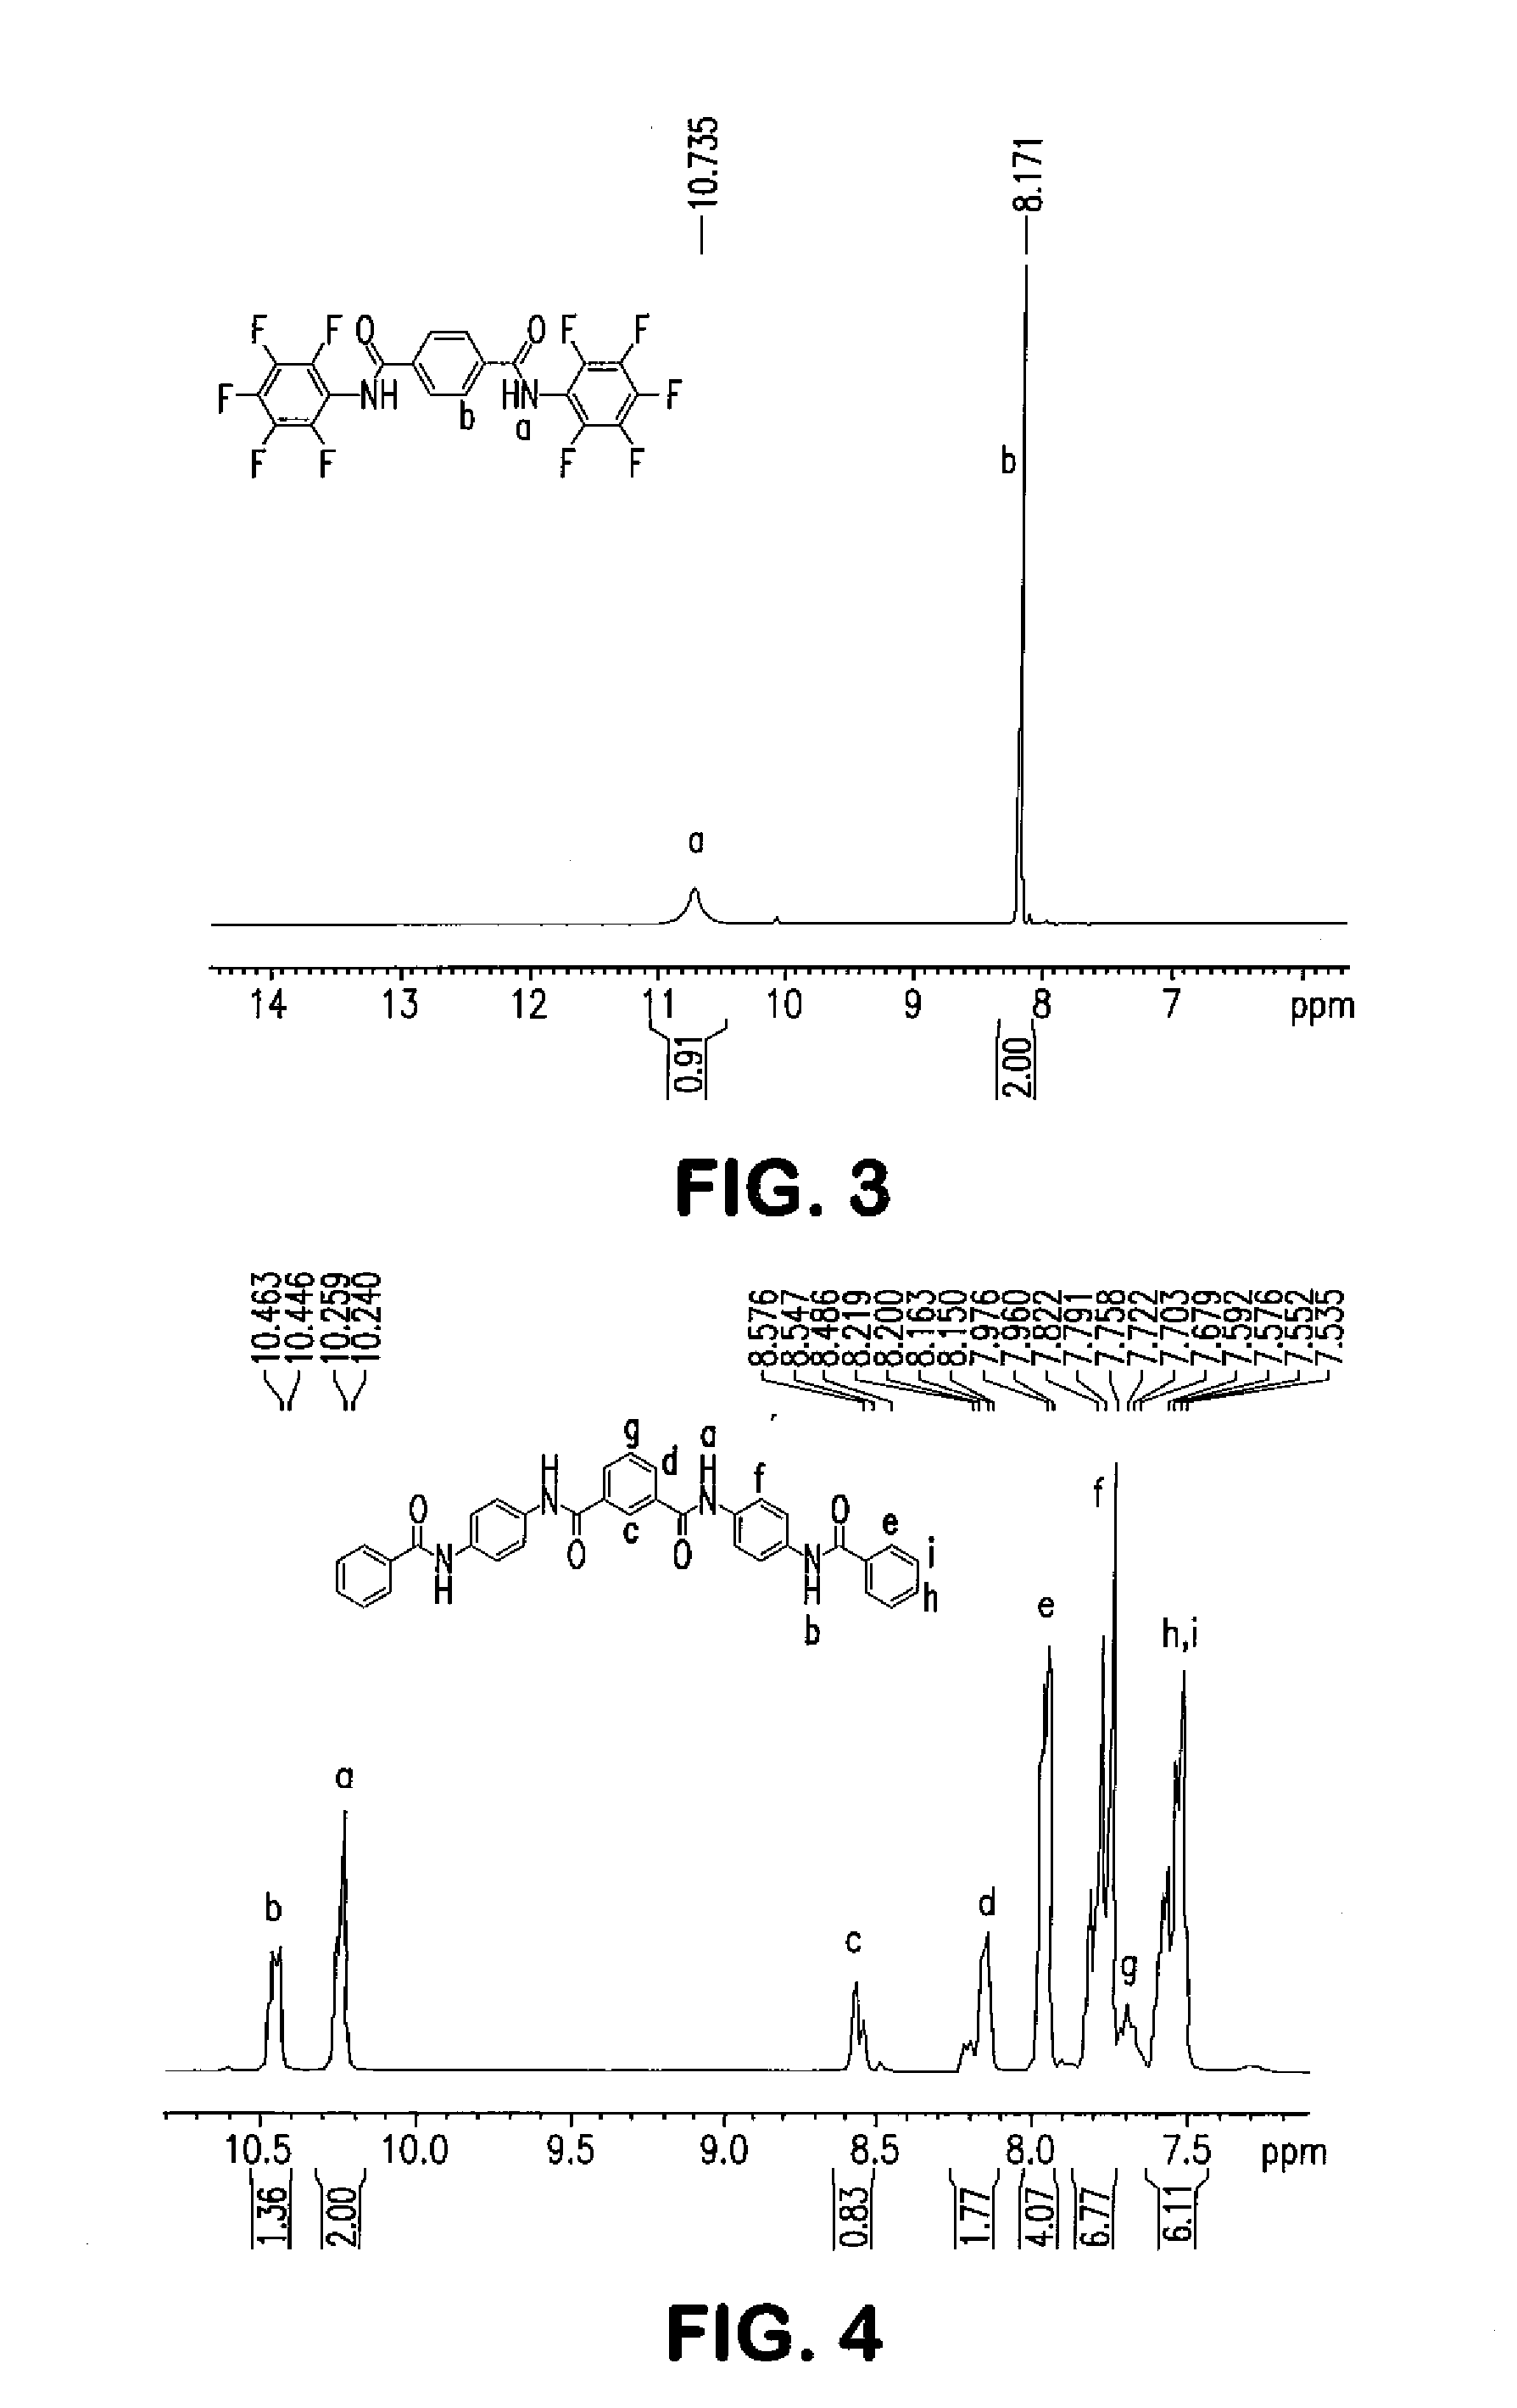 Liquid Crystalline Polymer Composition Containing a Fibrous Filler